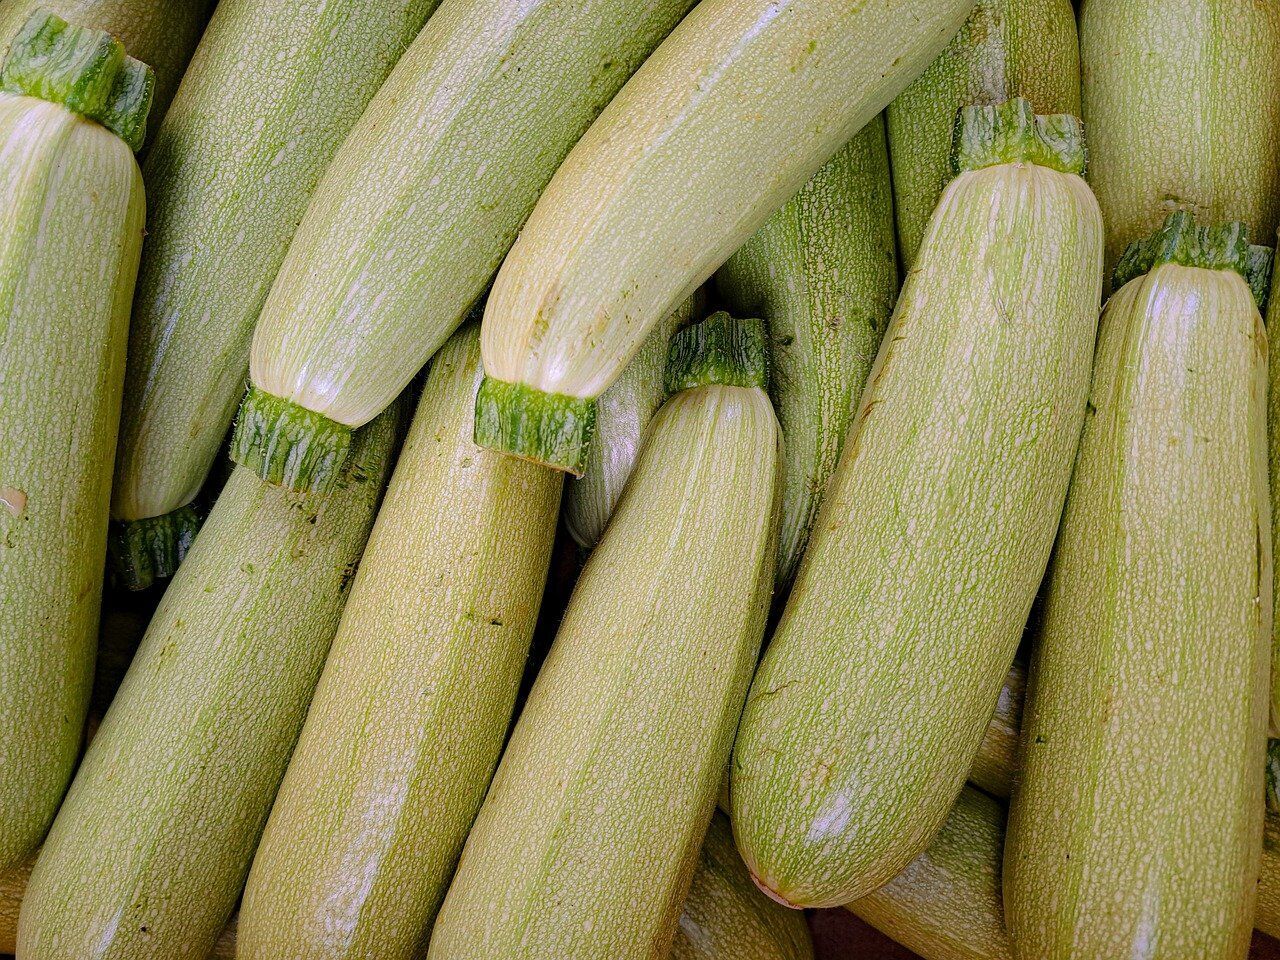 How to preserve courgettes properly